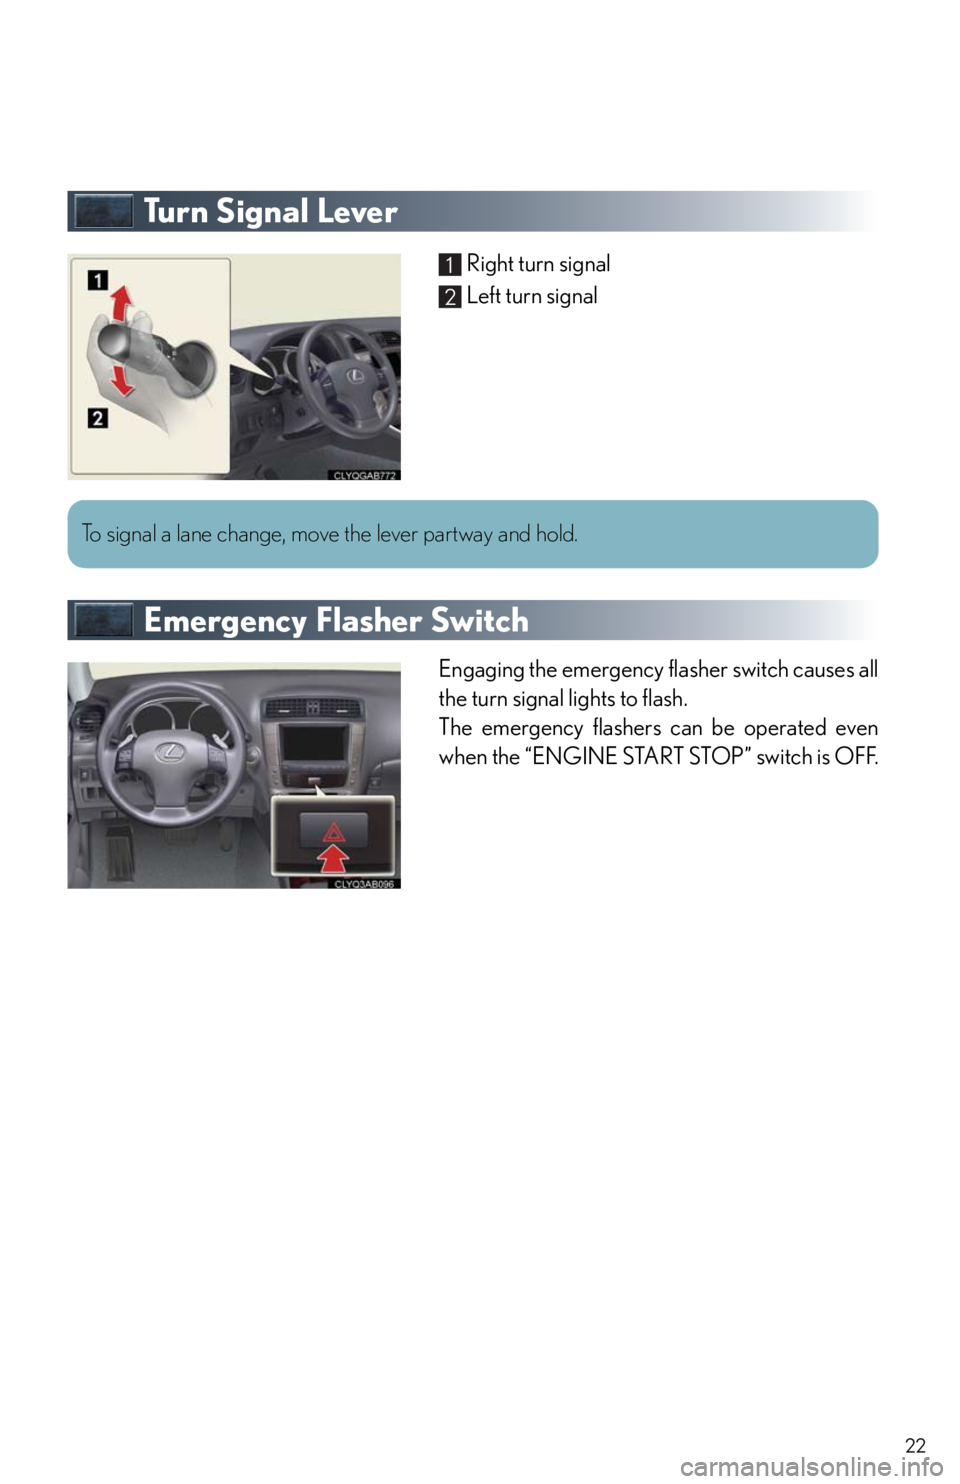 Lexus IS250 2010  Using The Air Conditioning System And Defogger / LEXUS 2010 IS350/250 QUICK GUIDE  (OM53812U) Owners Manual 22
Tu r n  S i g n a l  L e v e r
Right turn signal
Left turn signal
Emergency Flasher Switch
Engaging the emergency flasher switch causes all
the turn signal lights to flash.
The emergency flashers c